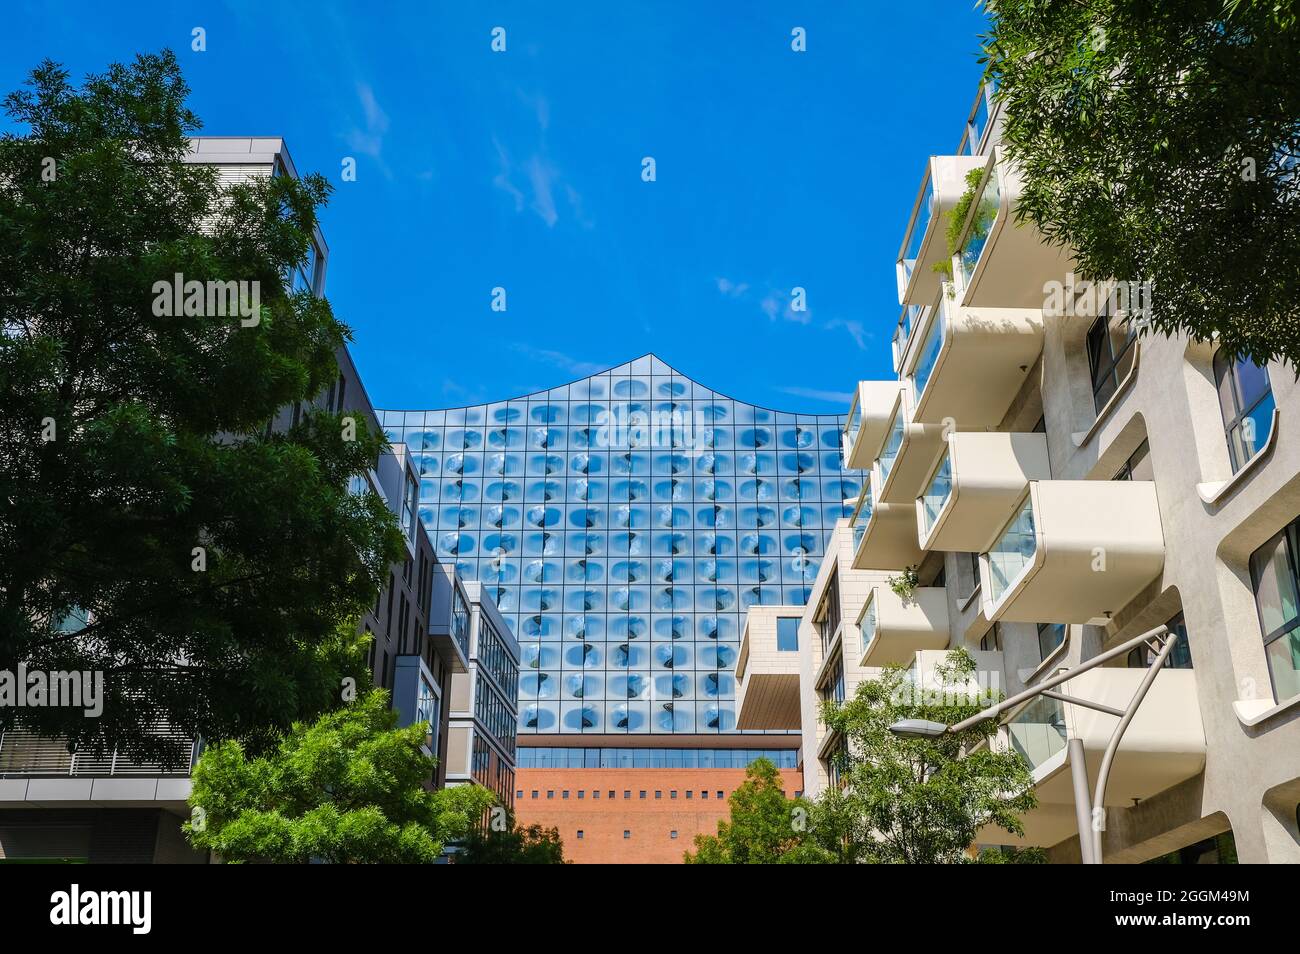 Hamburg, Germany - Hafencity, modern residential buildings in front of Elbphilharmonie. Stock Photo